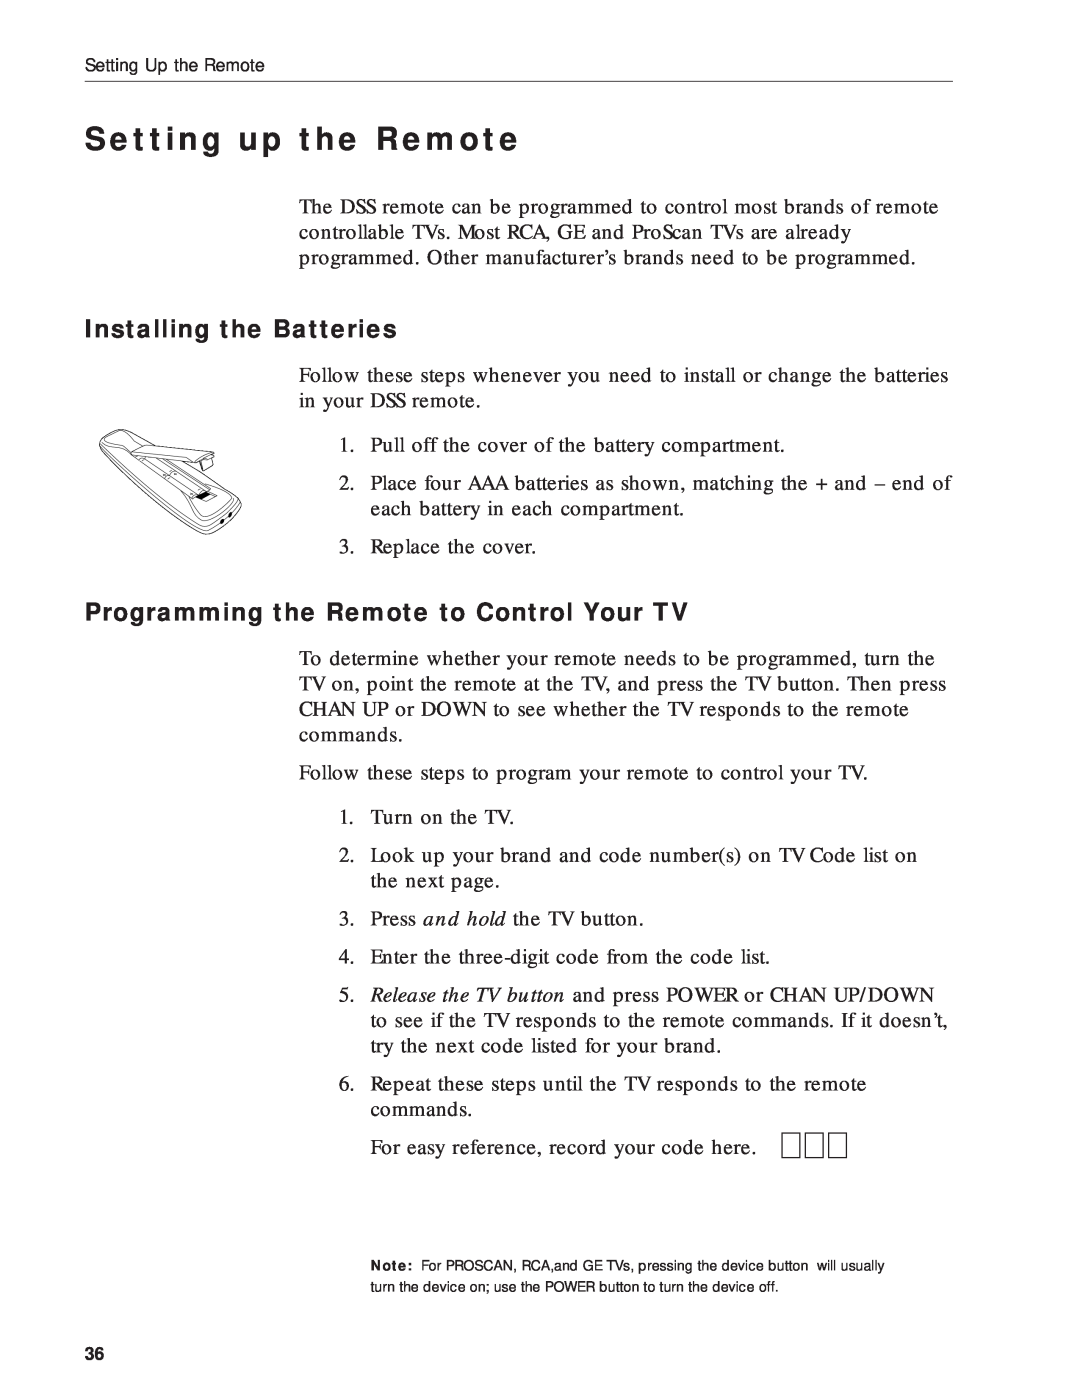 RCA DRD212NW user manual Setting up the Remote, Installing the Batteries, Programming the Remote to Control Your TV 